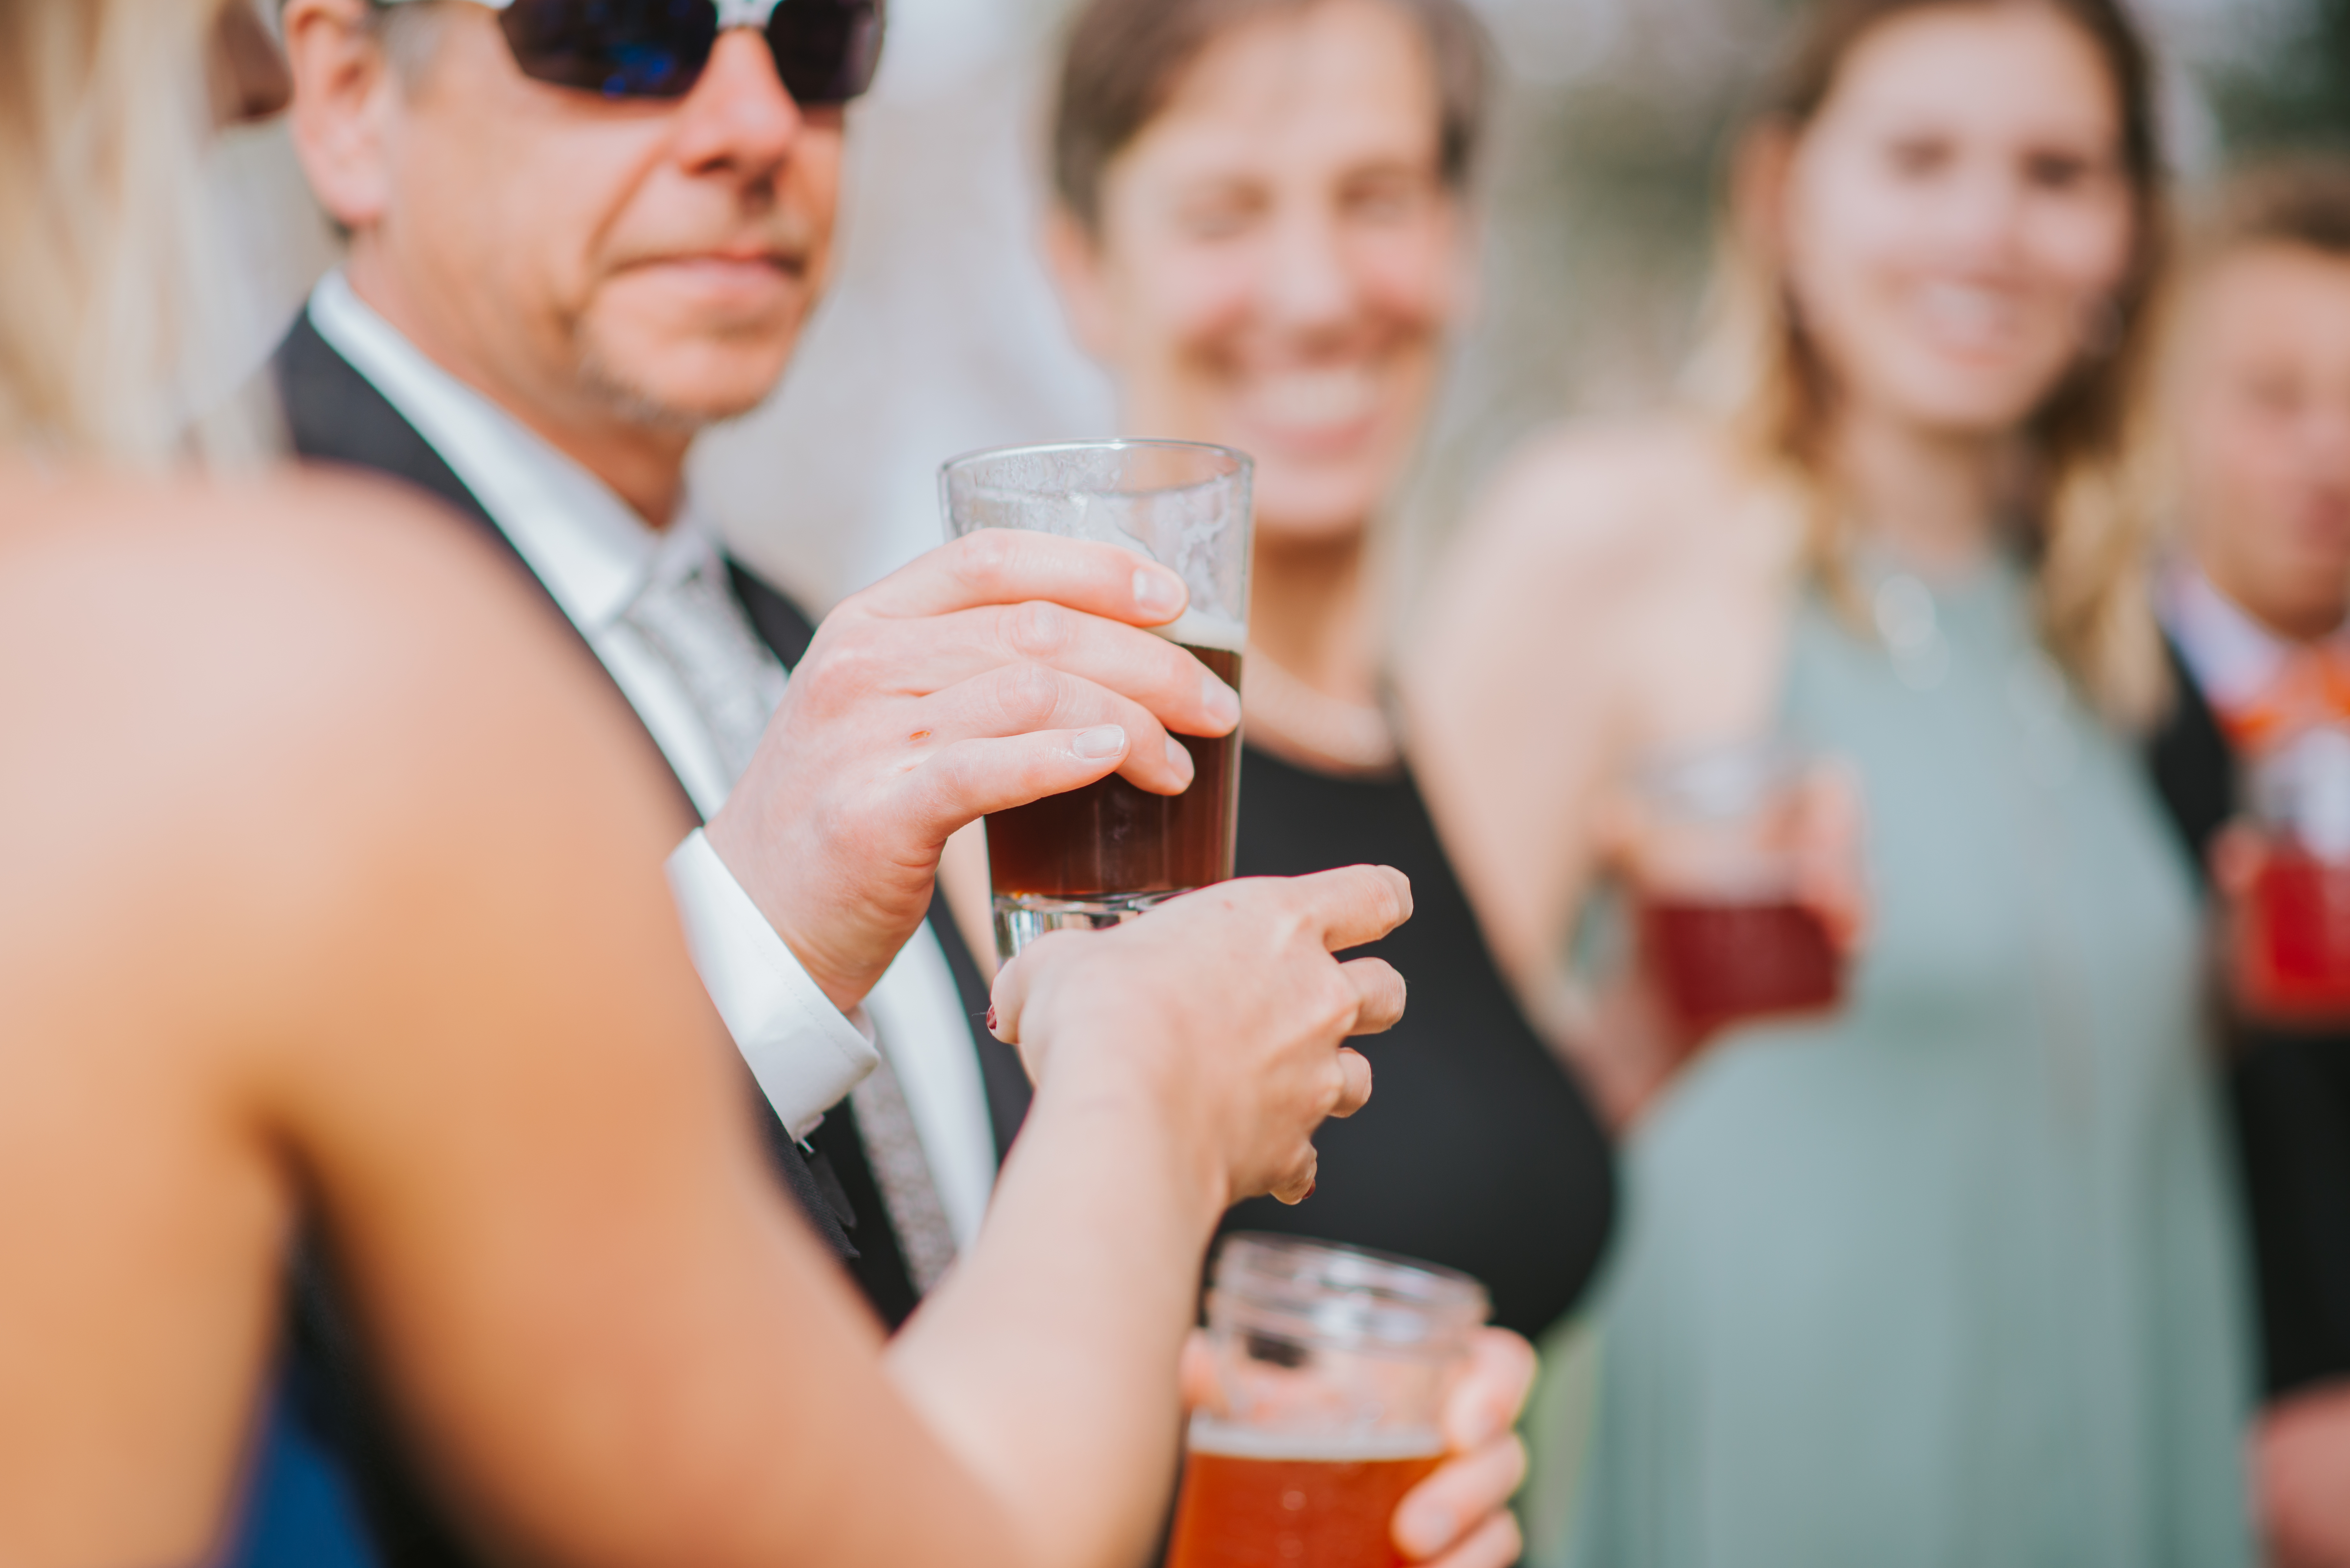 Craft Beer Inspired Intimate Elopement at Balboa Park San Diego by Kylie Rae Photography